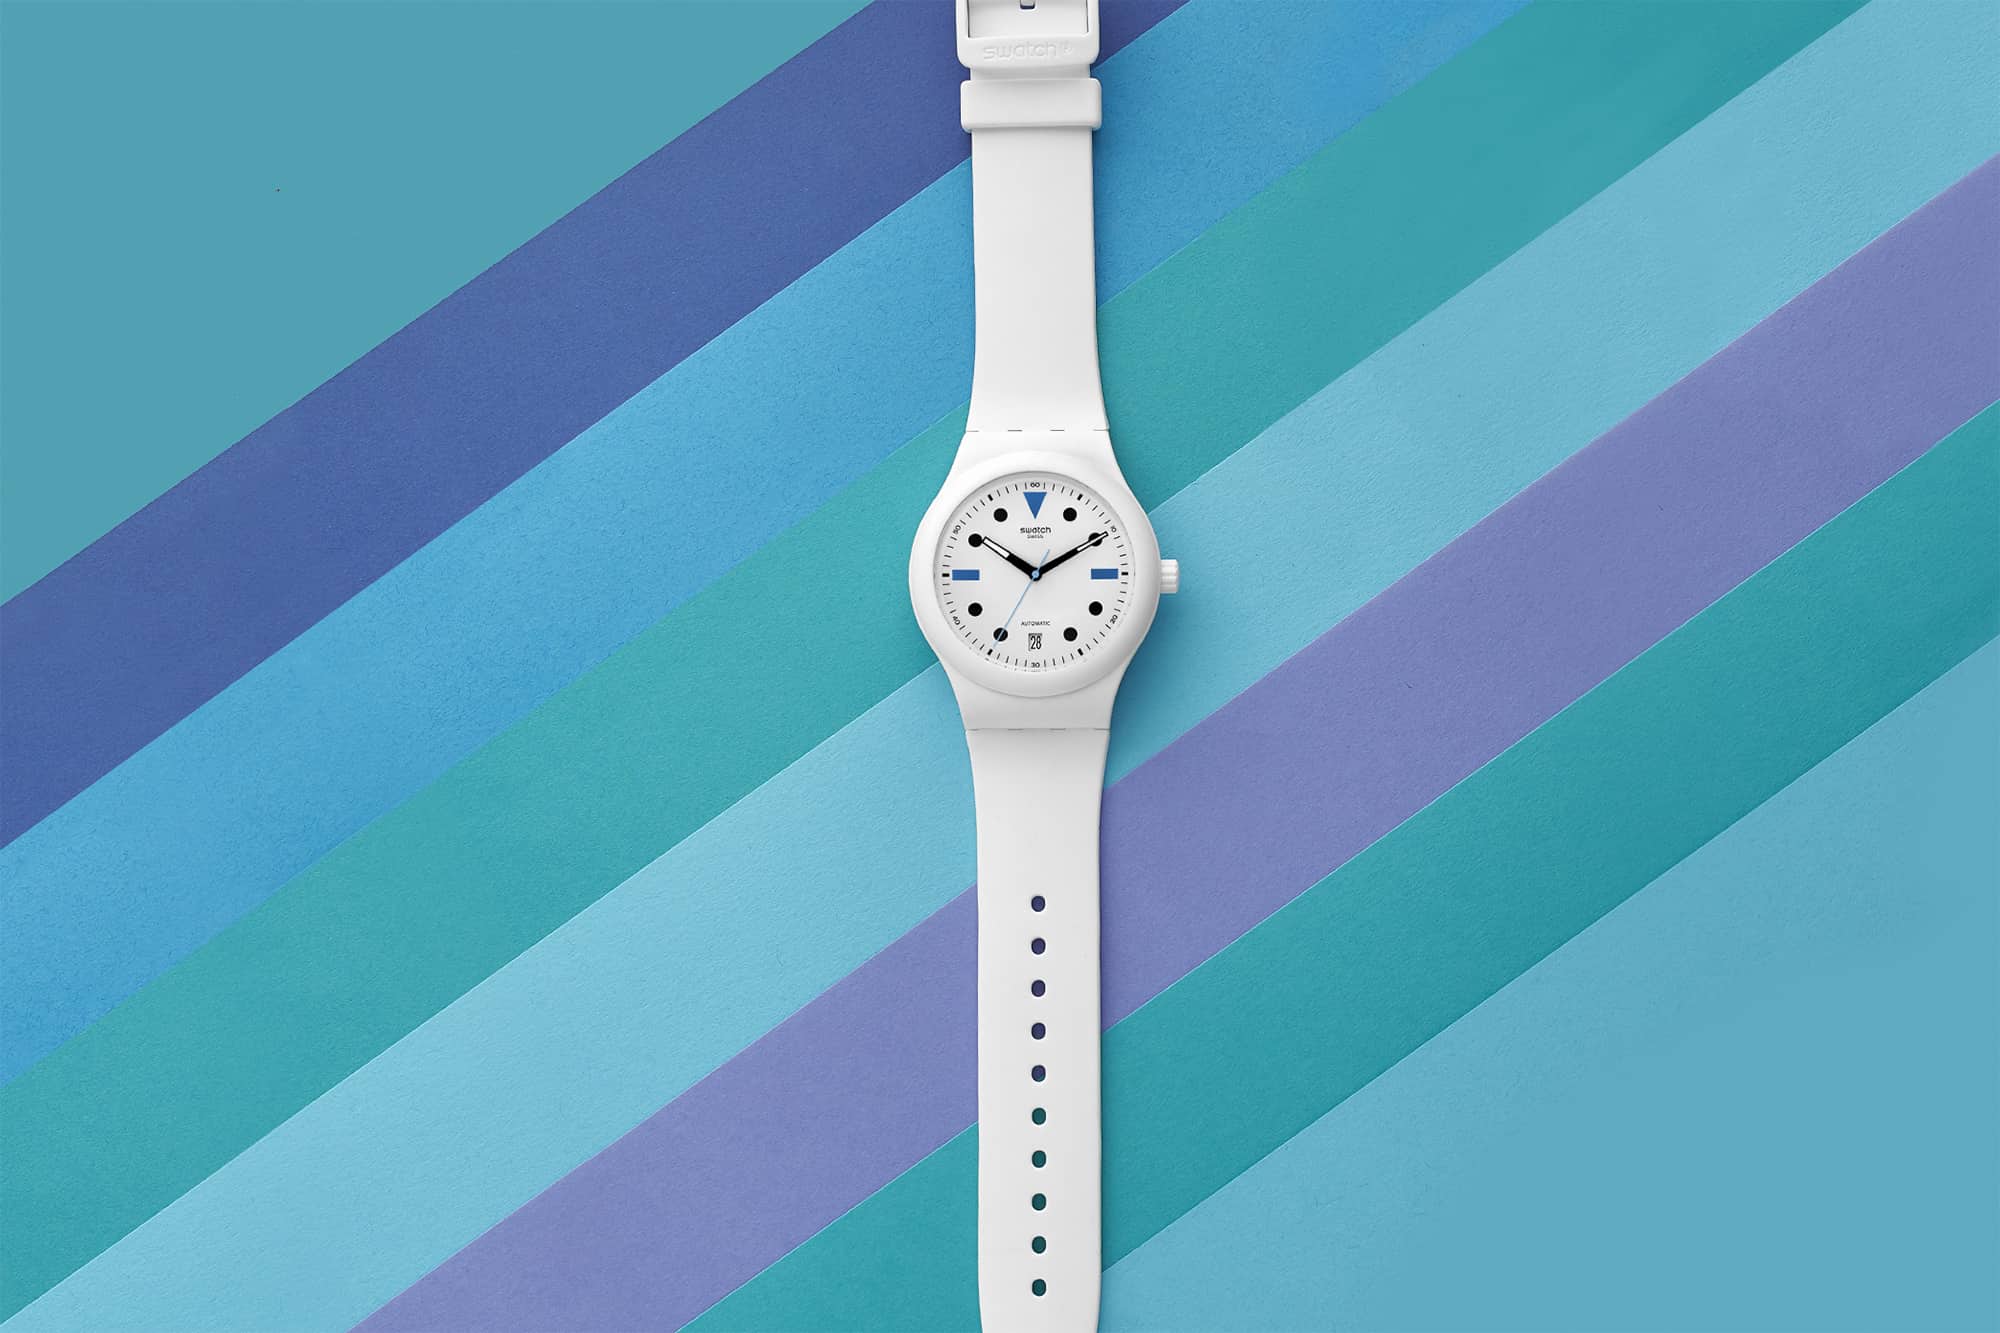 Hodinkee & Swatch Team Up for a Pair of Summer Watches